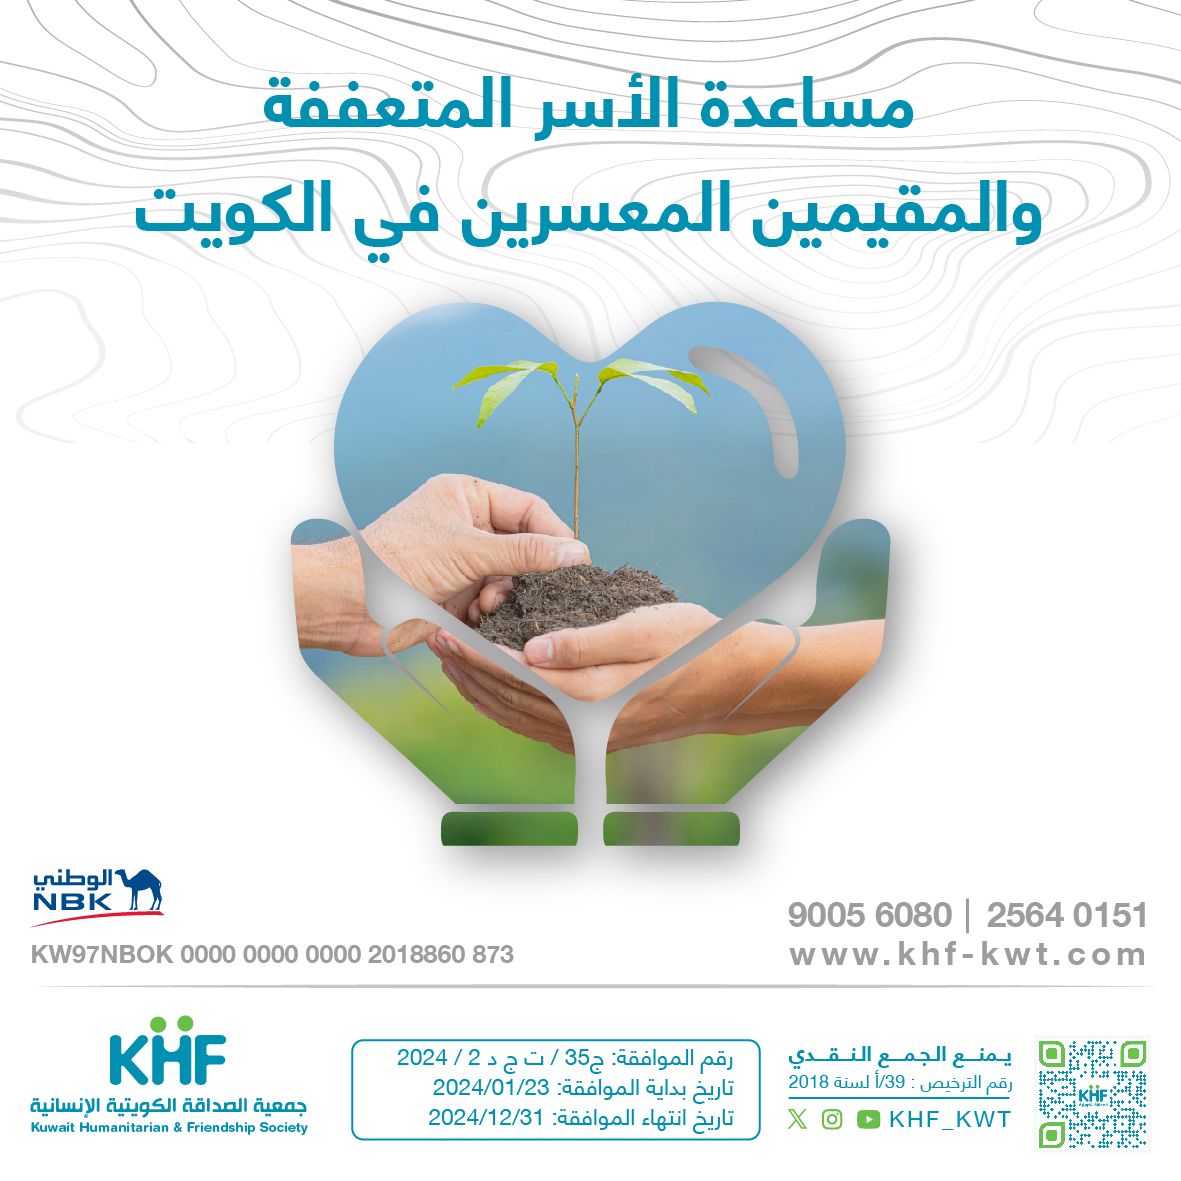 Assist families in need & insolvent residents in Kuwait